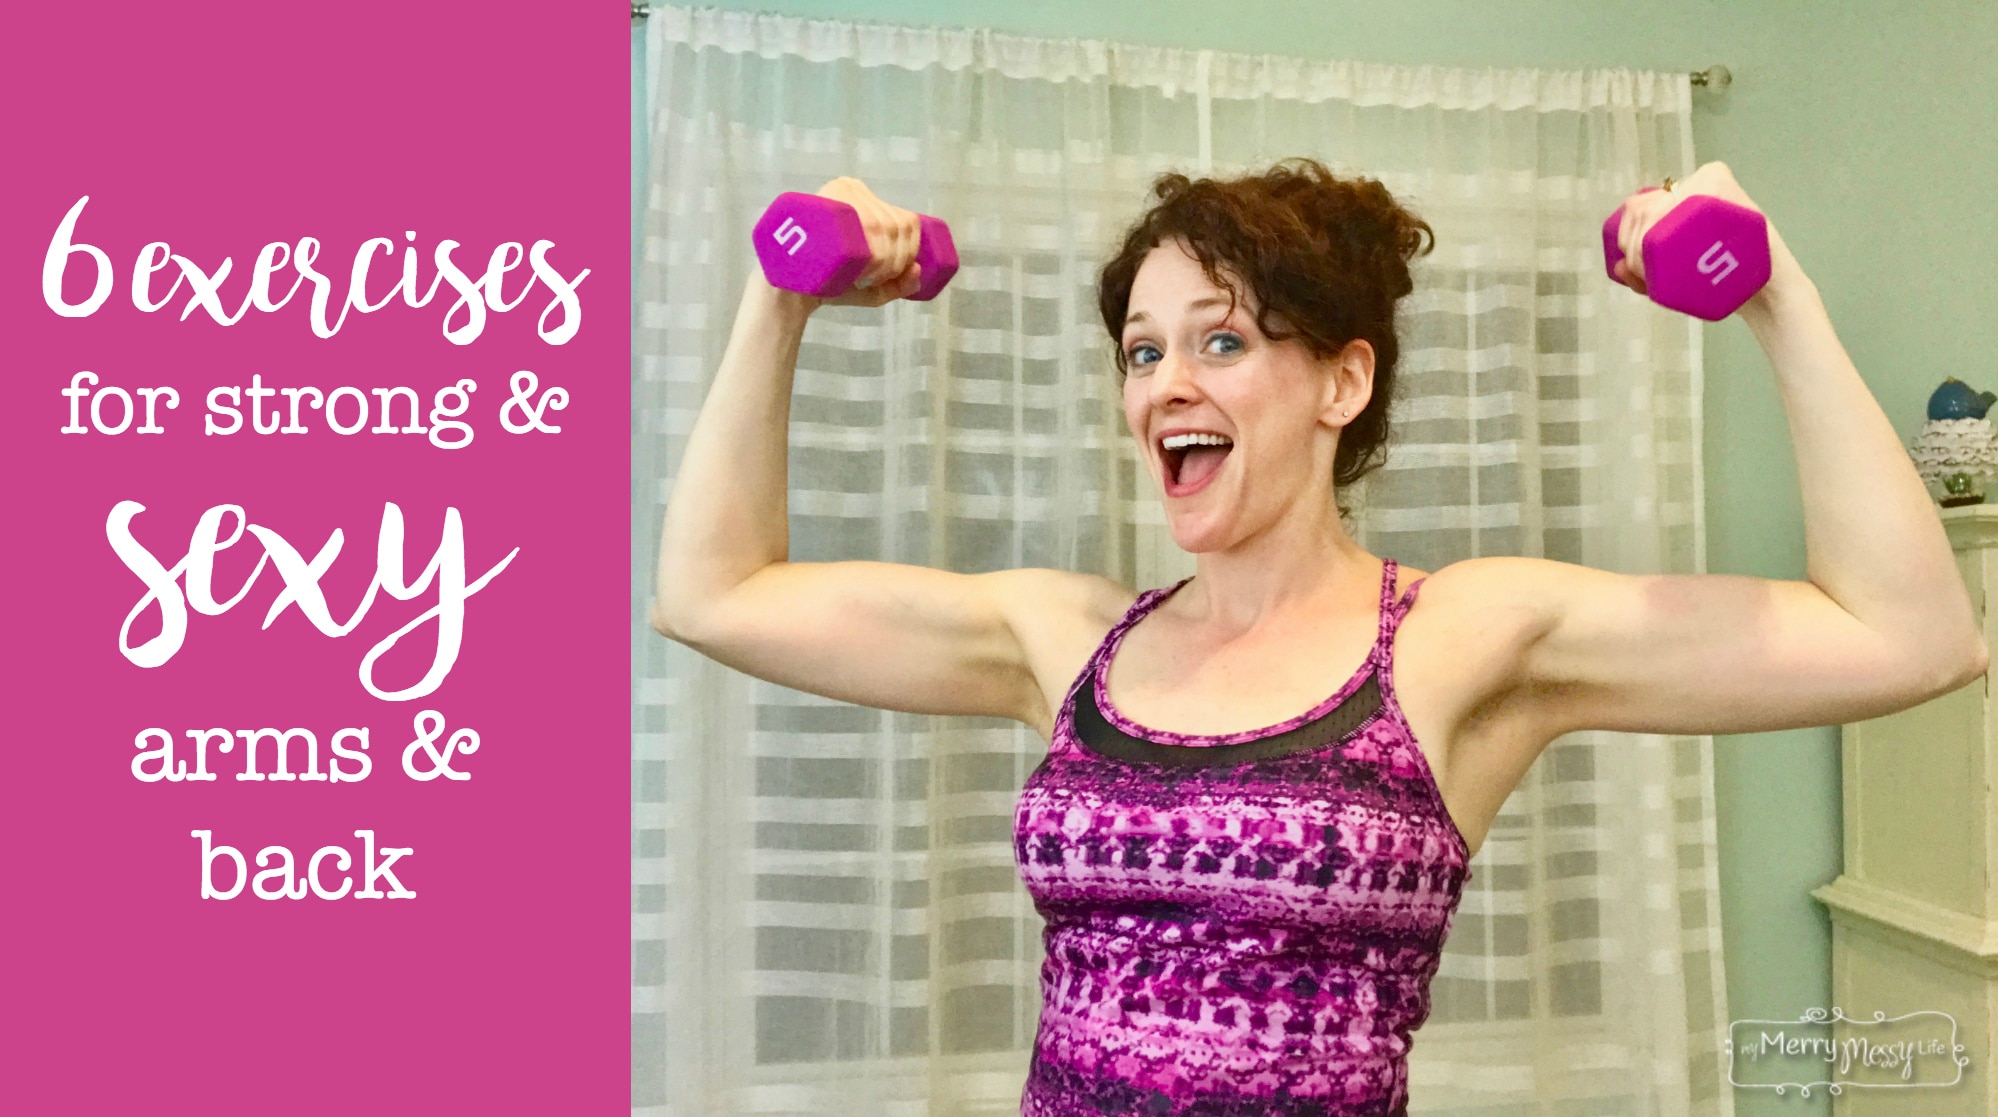 6 Exercises for strong and sexy arms and back - just 15 minutes total!